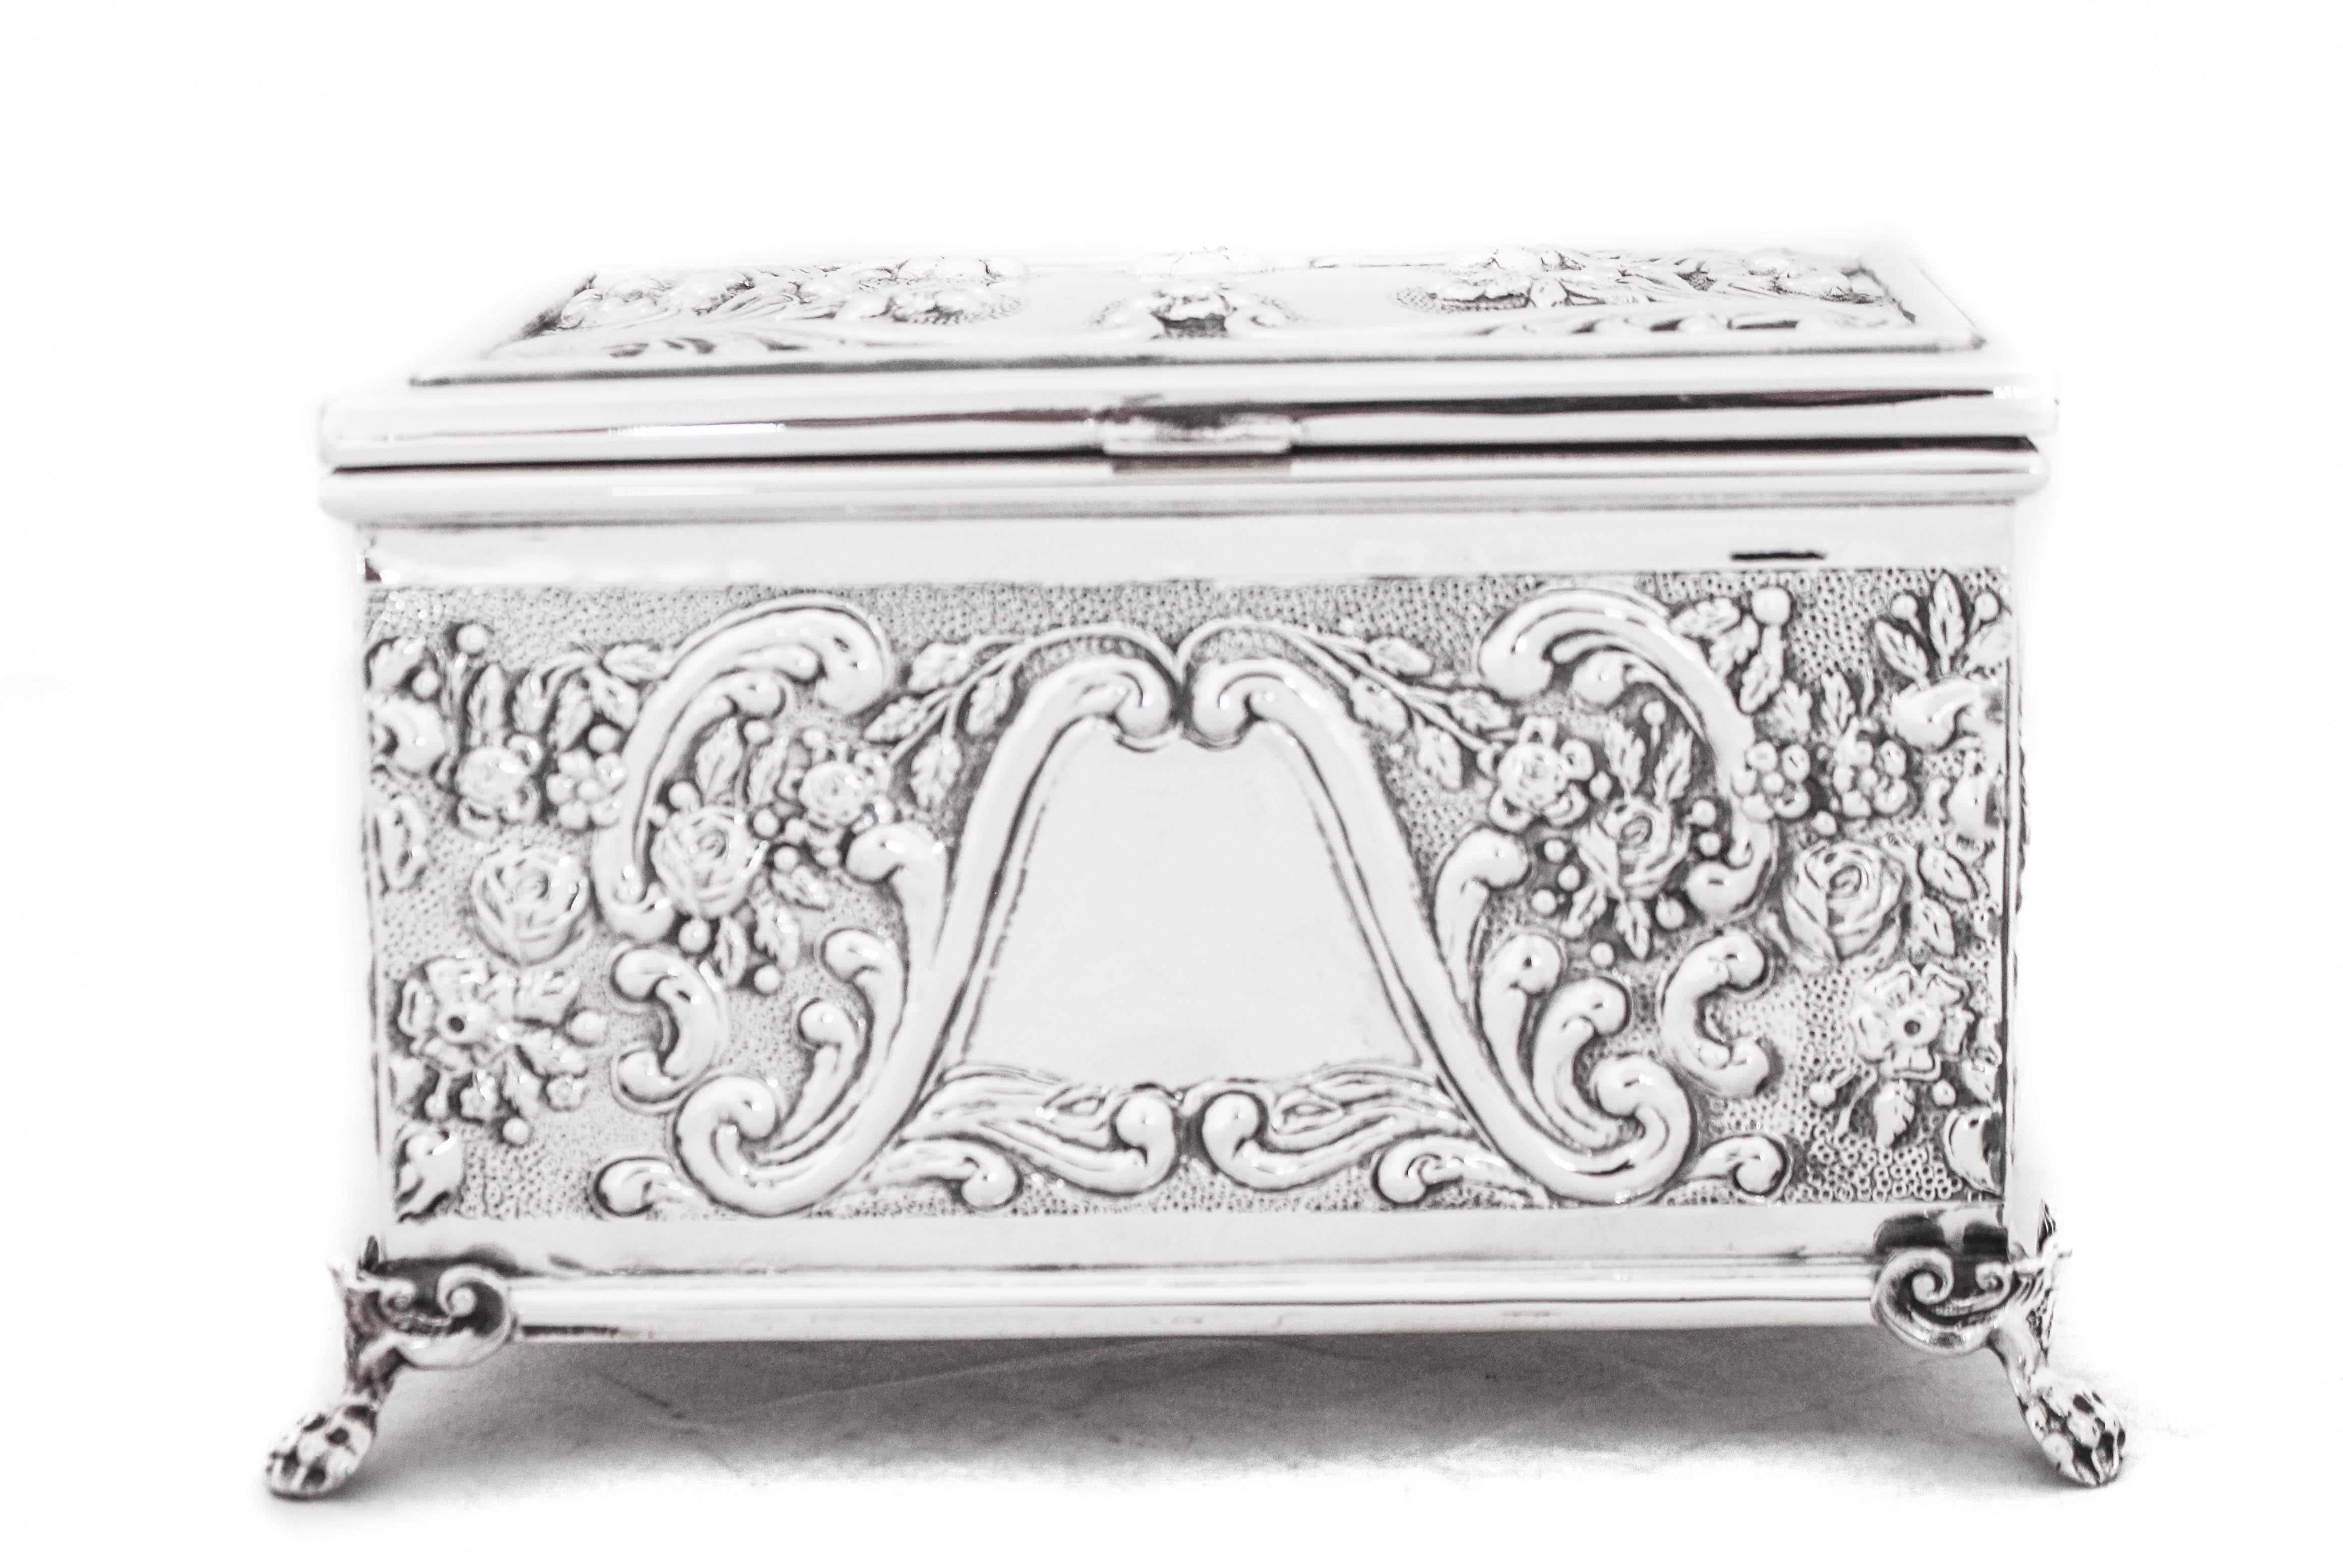 Being offered is a sterling silver Etrog box.  It is rectangular and stands on four feet.  It has raised-work of flowers, leaves & swirls on the lid as well as on each panel.  The inside is gold washed to protect it.  What a beautiful way to perform